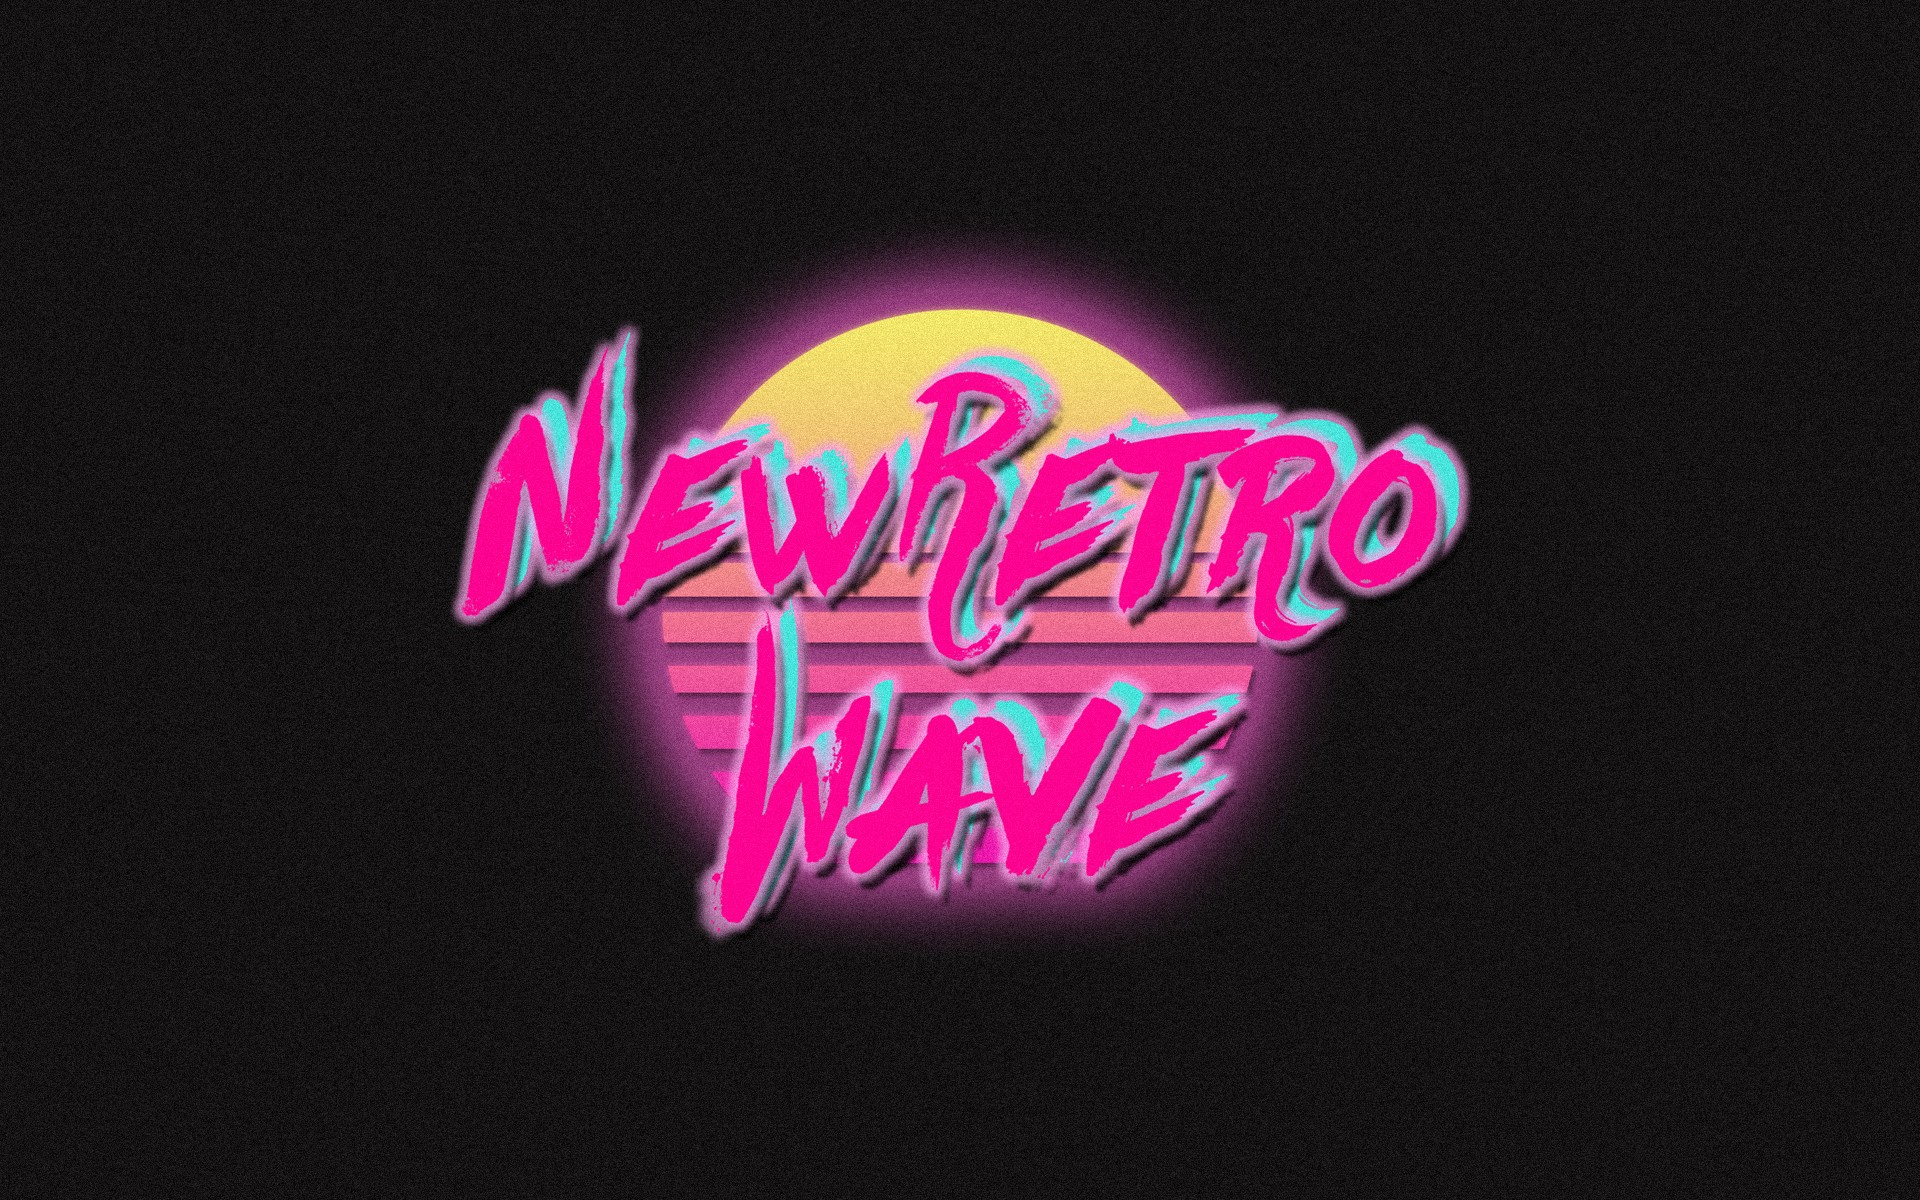 New Retro Wave - Synthwave Wallpaper 1920 X 1200 , HD Wallpaper & Backgrounds